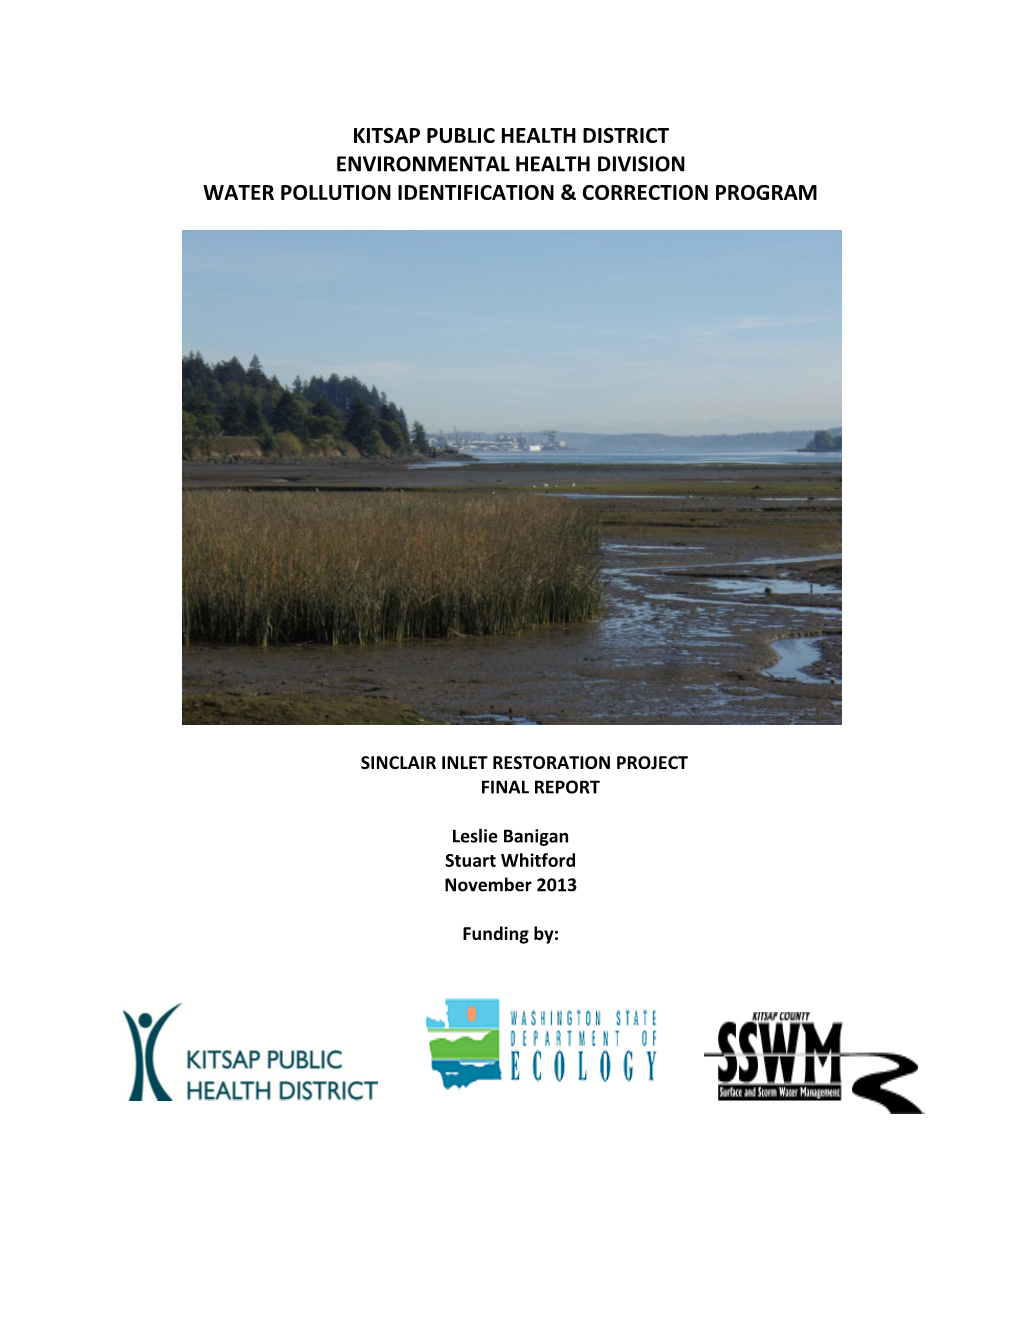 Sinclair Inlet Restoration Project Final Report, 2013